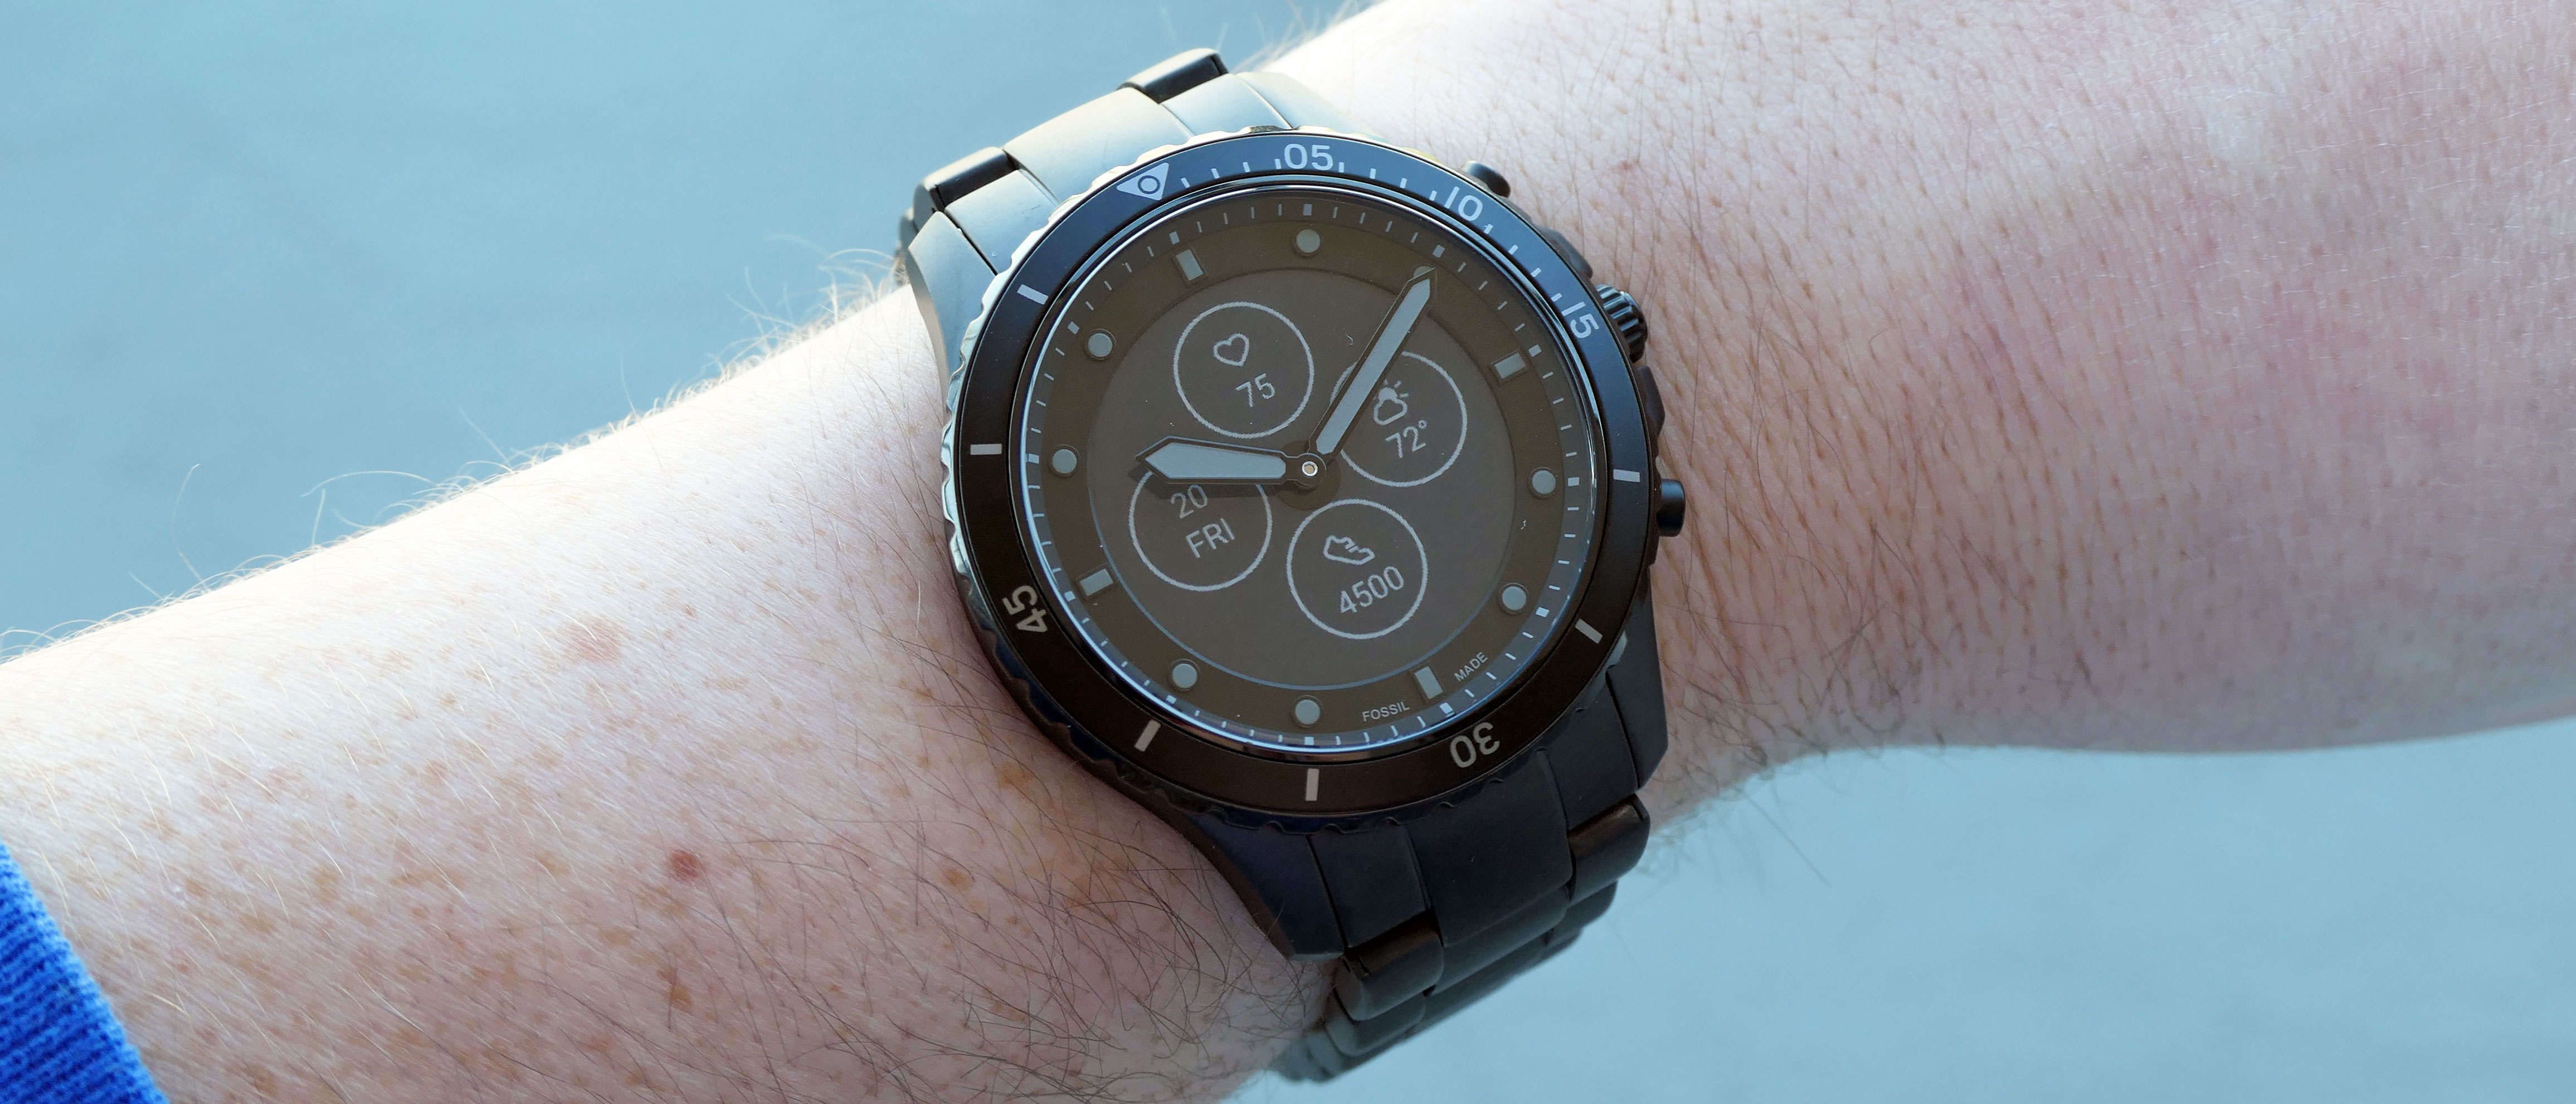 Hands on: Fossil Hybrid HR hands on review | TechRadar